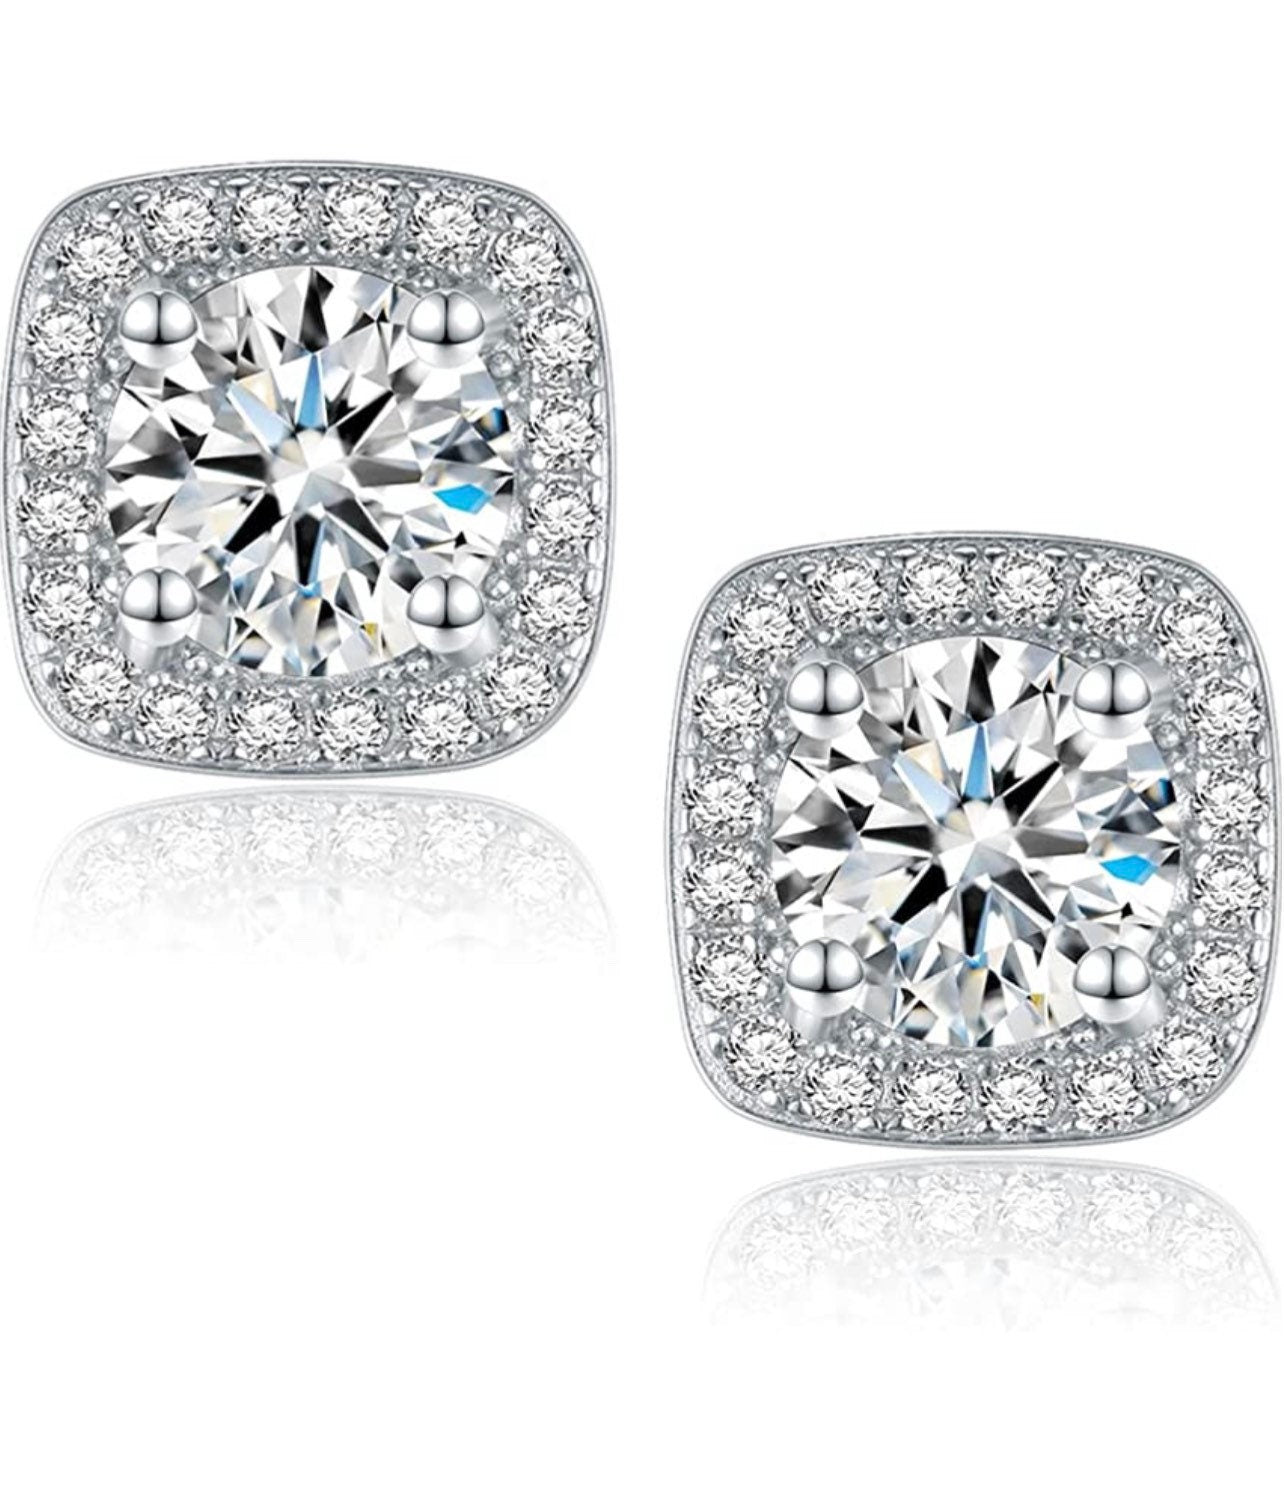 Vvs GRA certified 1ct Moissanite brilliant cut made in the USA Mesmerizing diamond earrings 5mm each stud Best gift ever! Unbeatable price